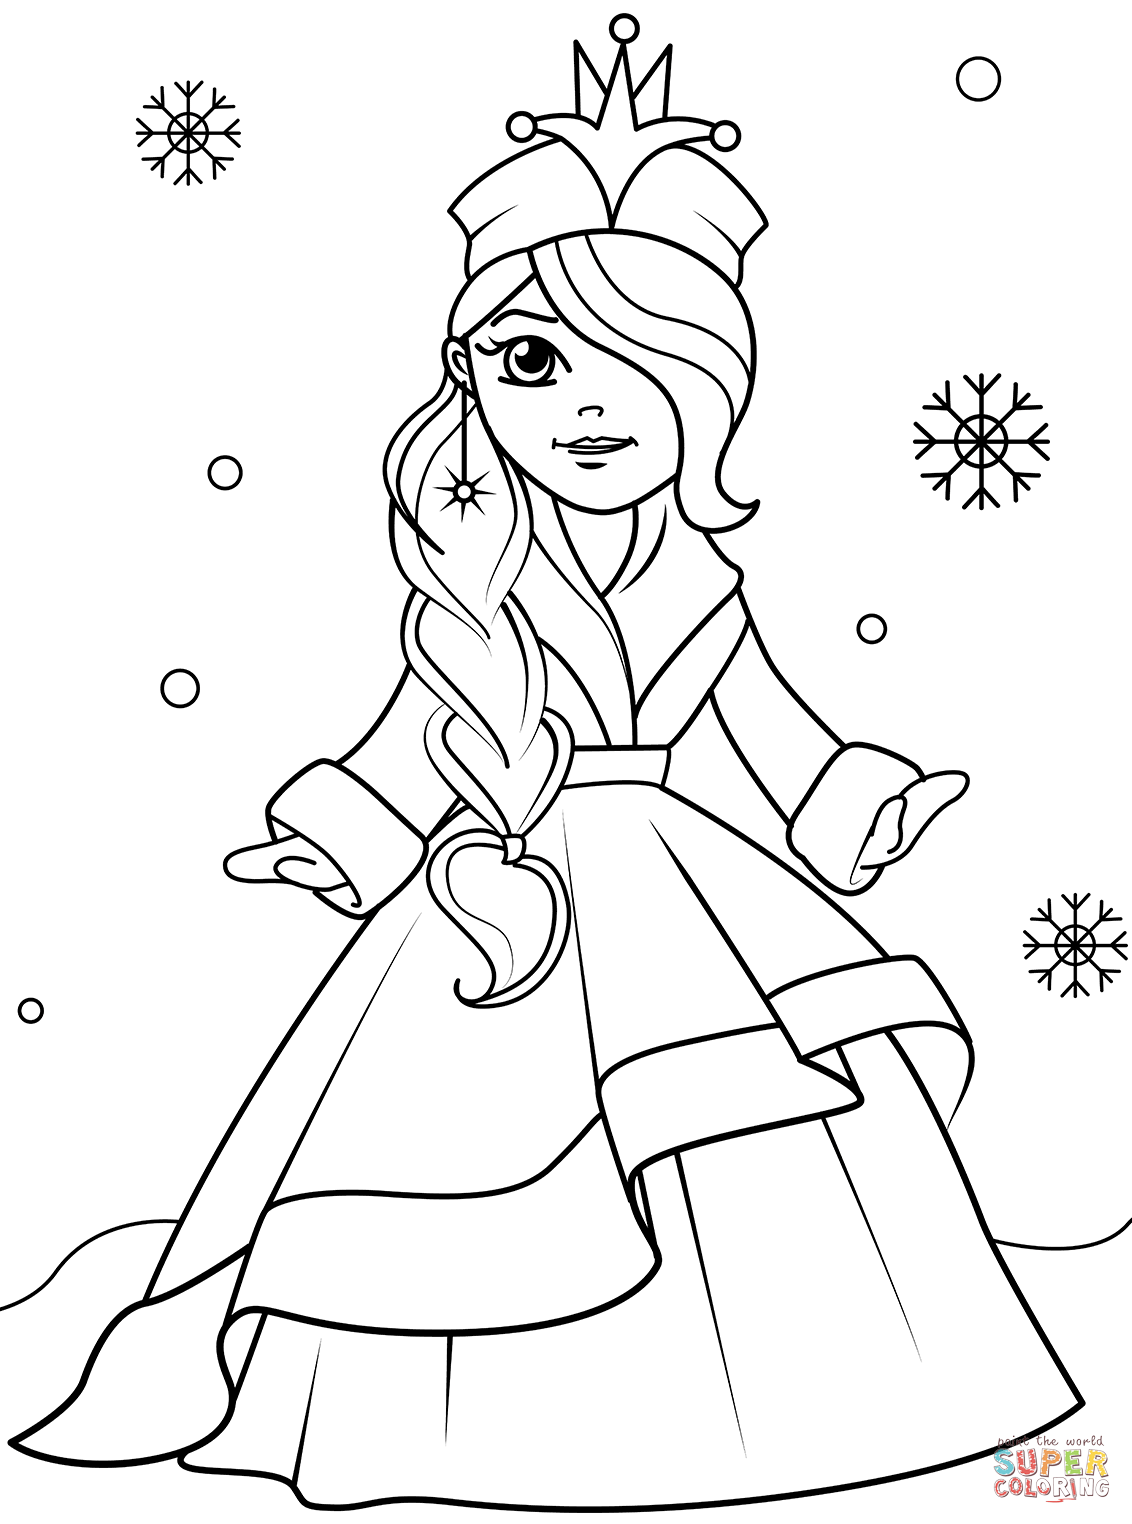 Winter princess coloring page free printable coloring pages